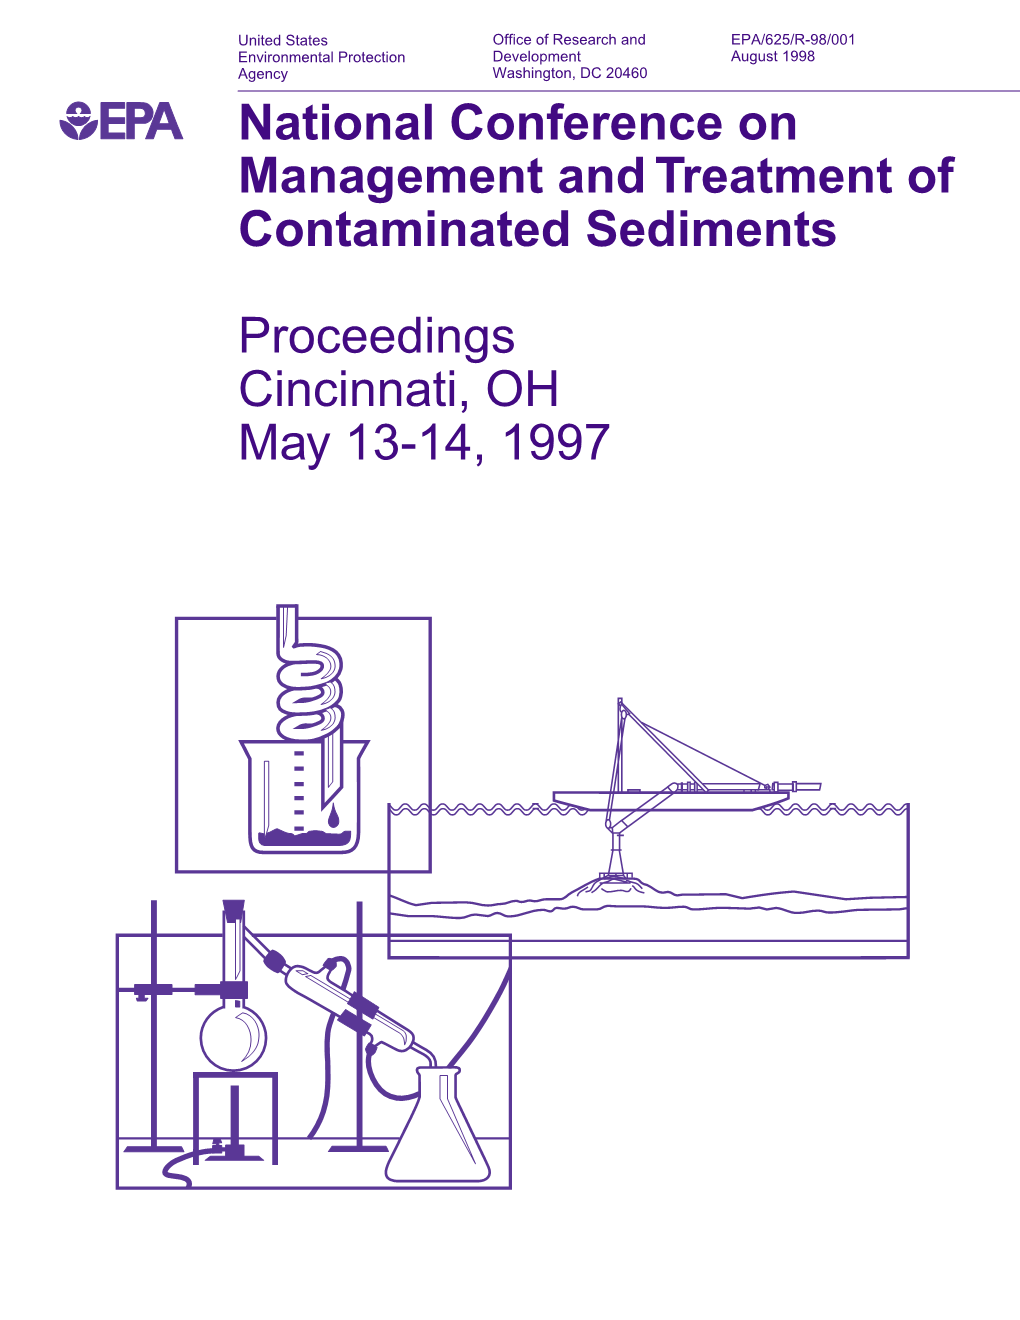 National Conference on Management and Treatment of Contaminated Sediments